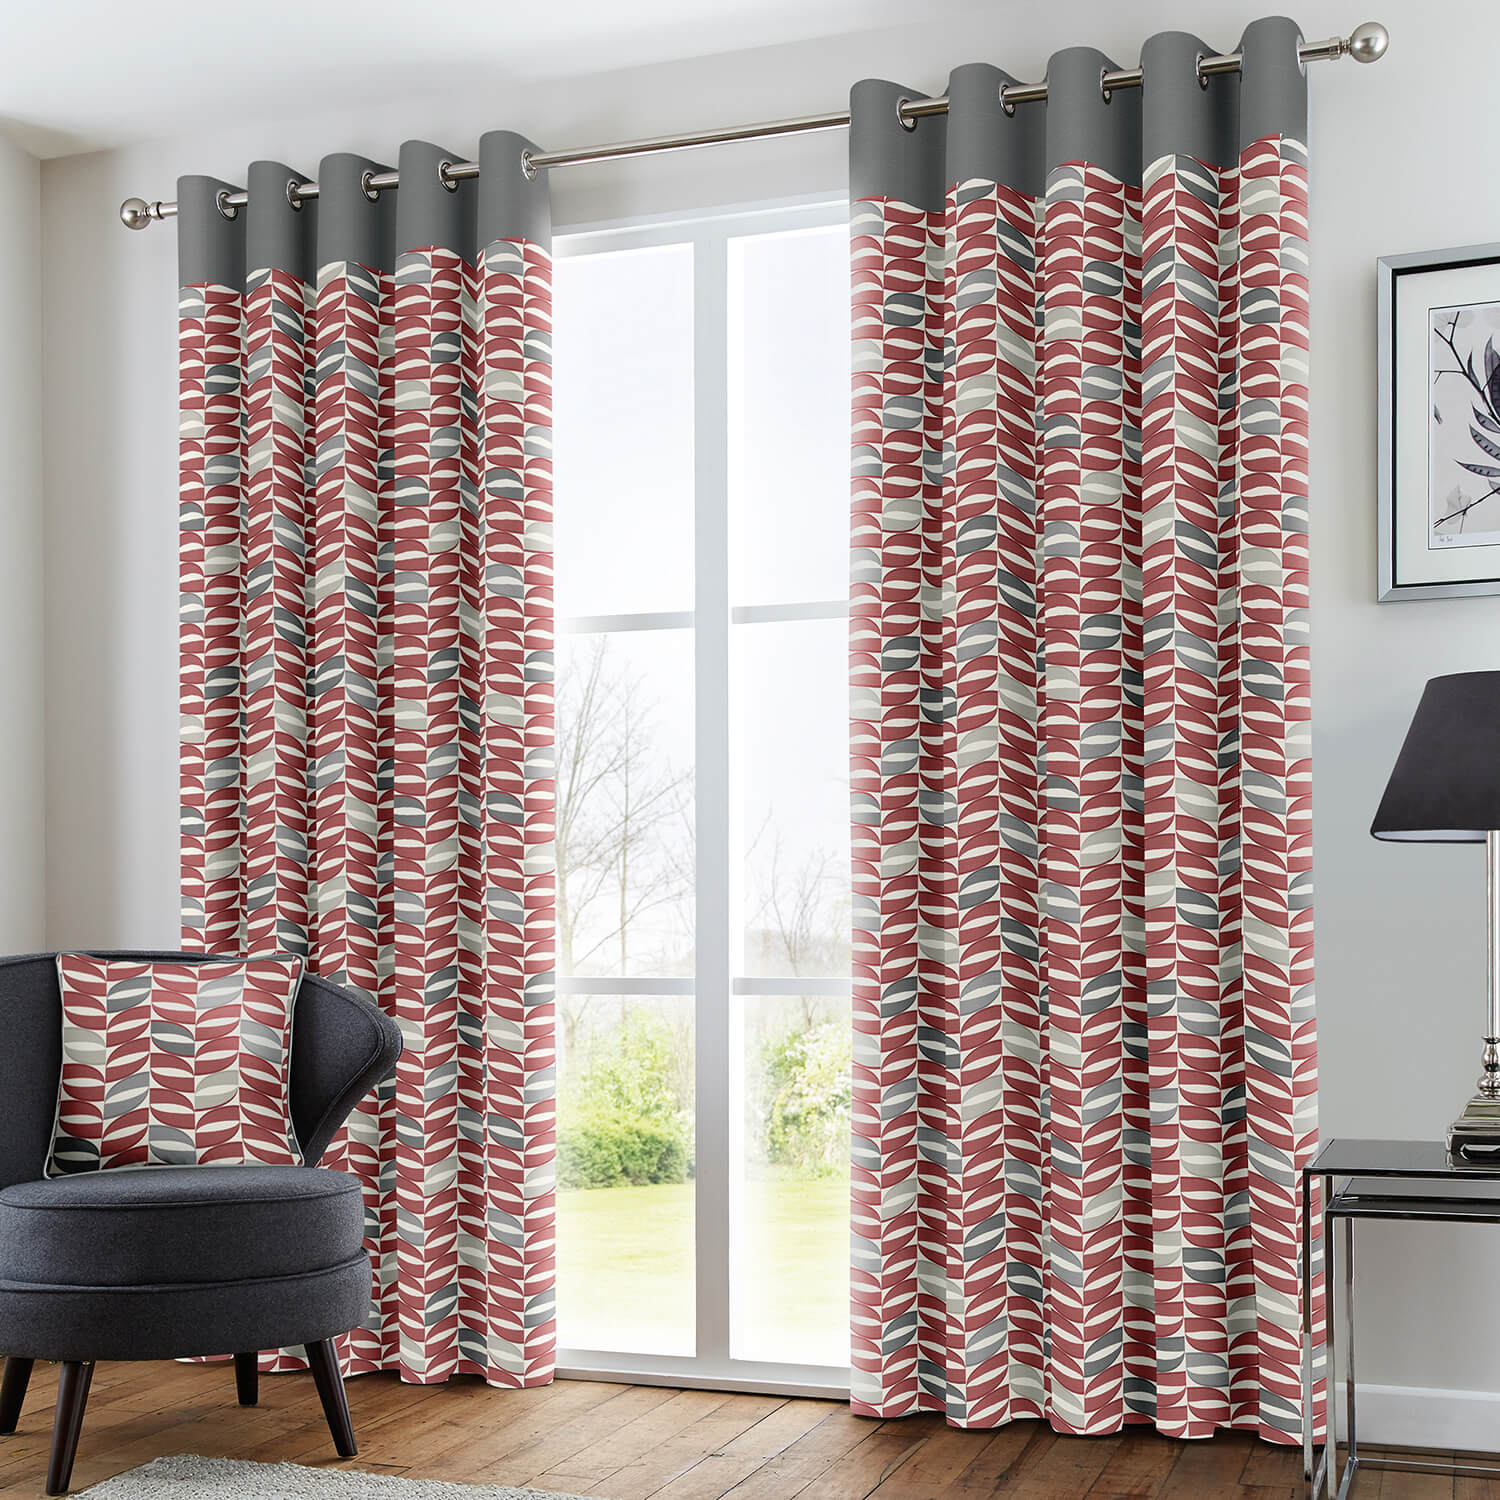 The Home Living Room Copeland Eyelet Curtain - Red 1 Shaws Department Stores